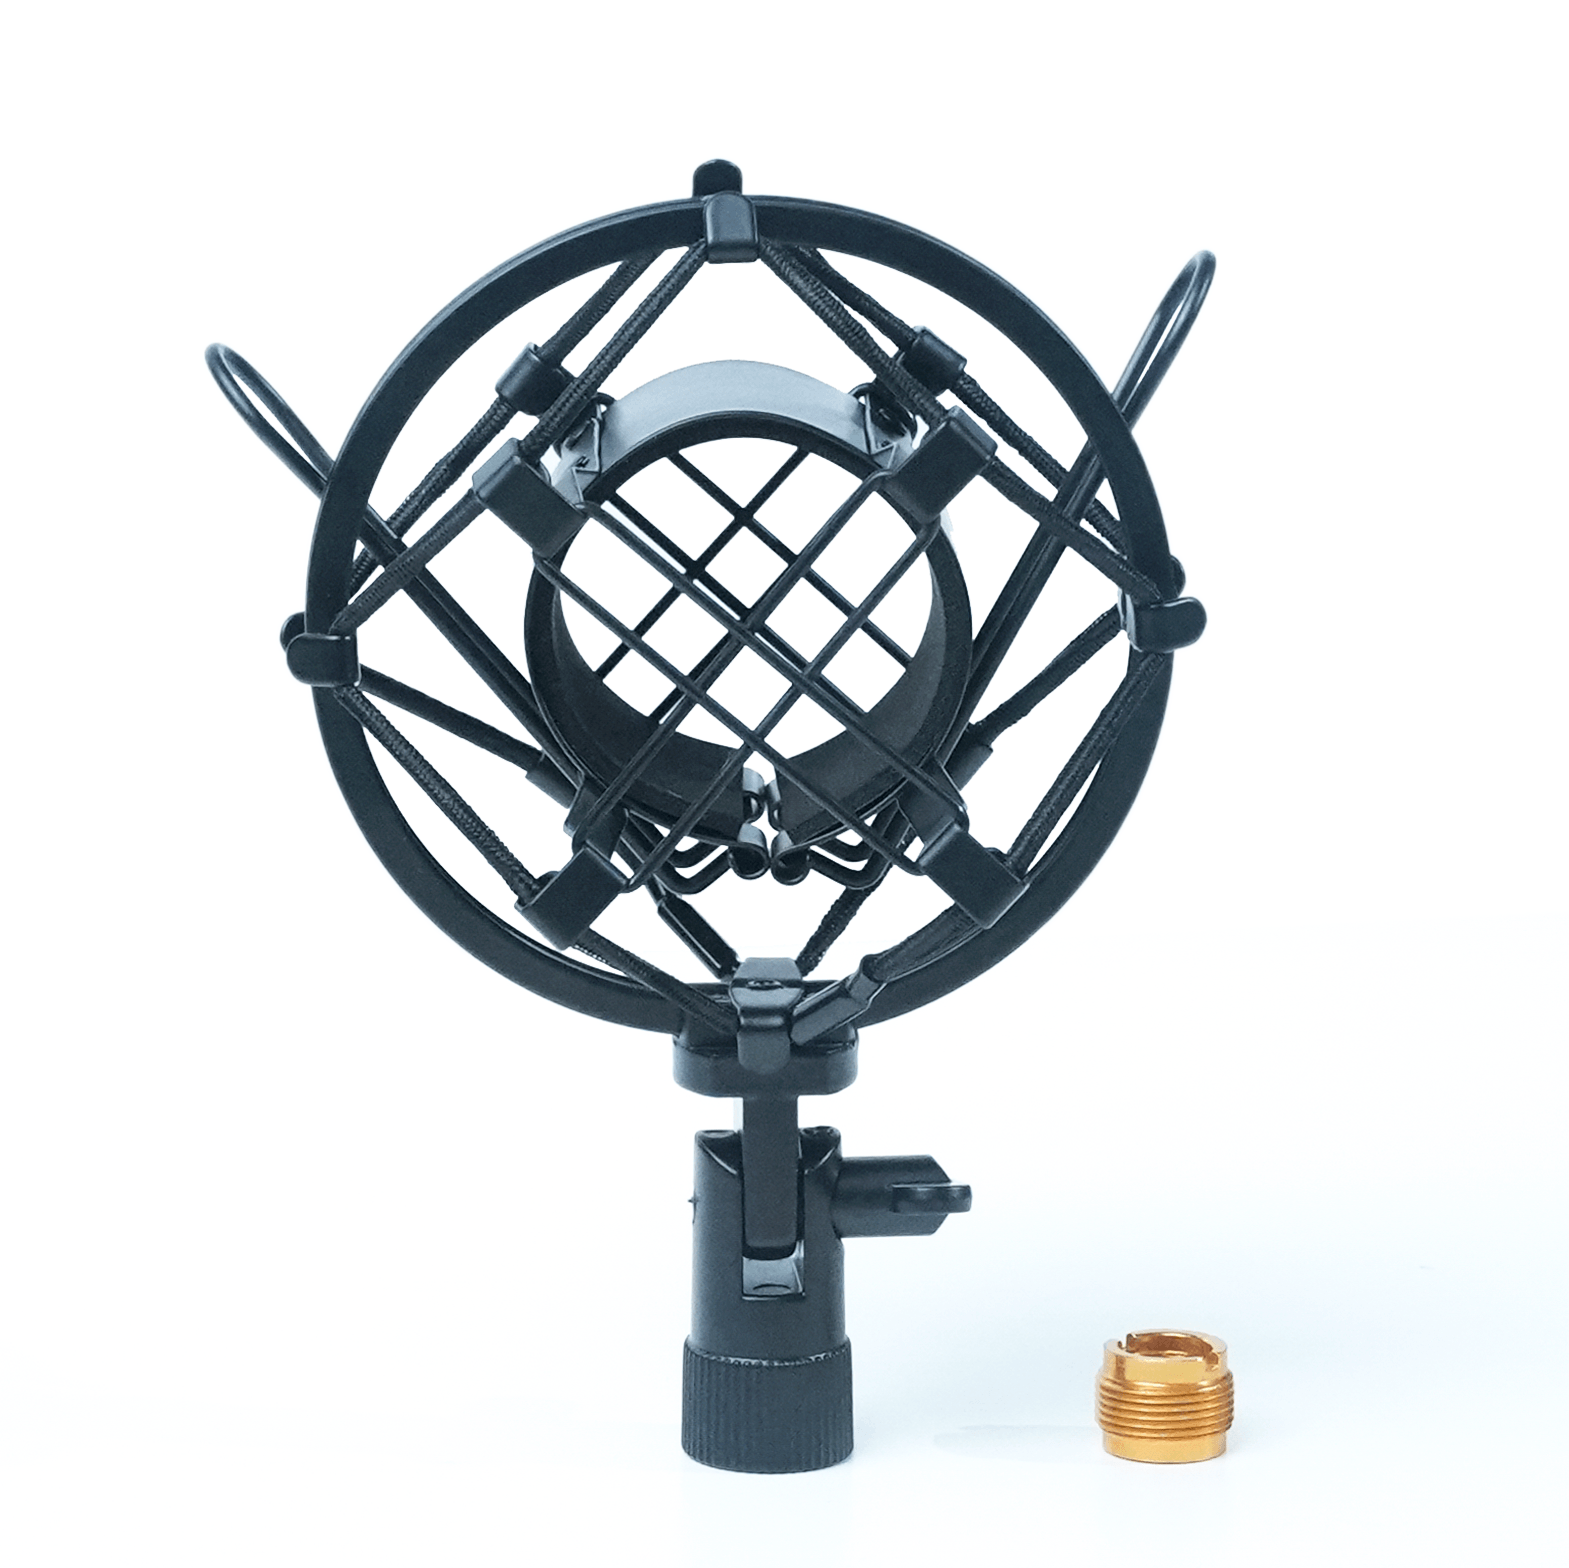 Universal Shock Mount for Shotgun Microphones fits 5/8 and 3/8 Inch Boom Poles